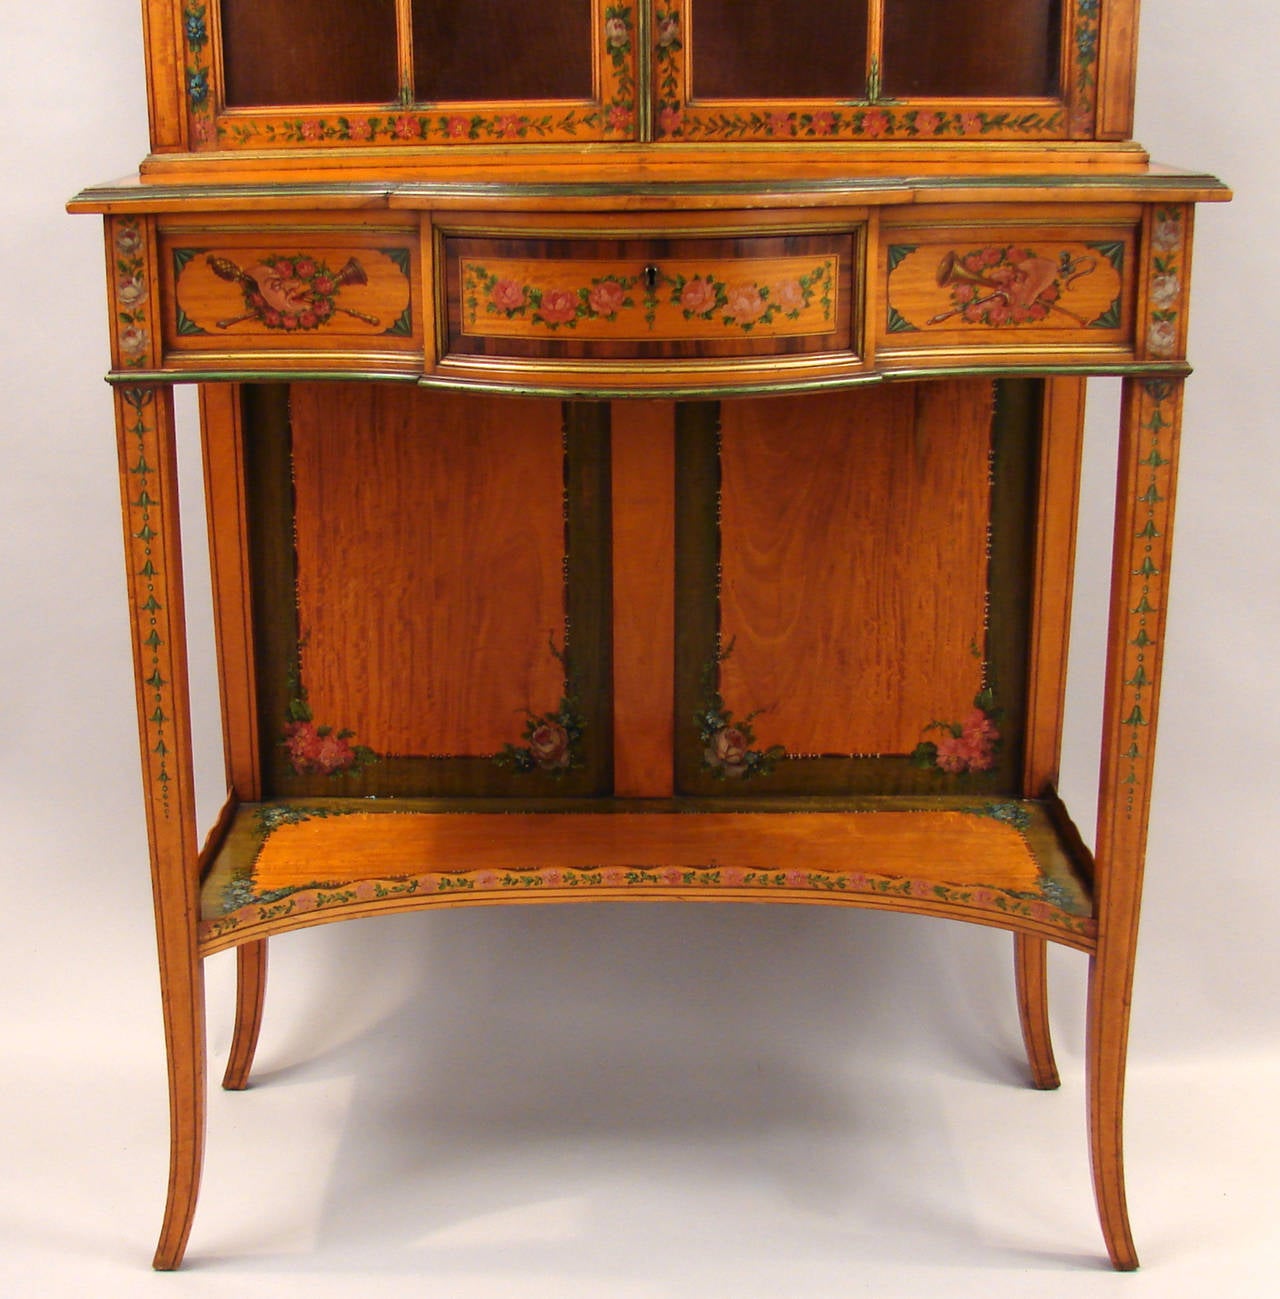 A fine quality English Neoclasssical style paint-decorated satinwood bookcase on stand, having a broken arch pediment with trompe l'oeil dentil molding above astragal glazed doors with elaborate painted decoration in the manner of Angelica Kaufman,